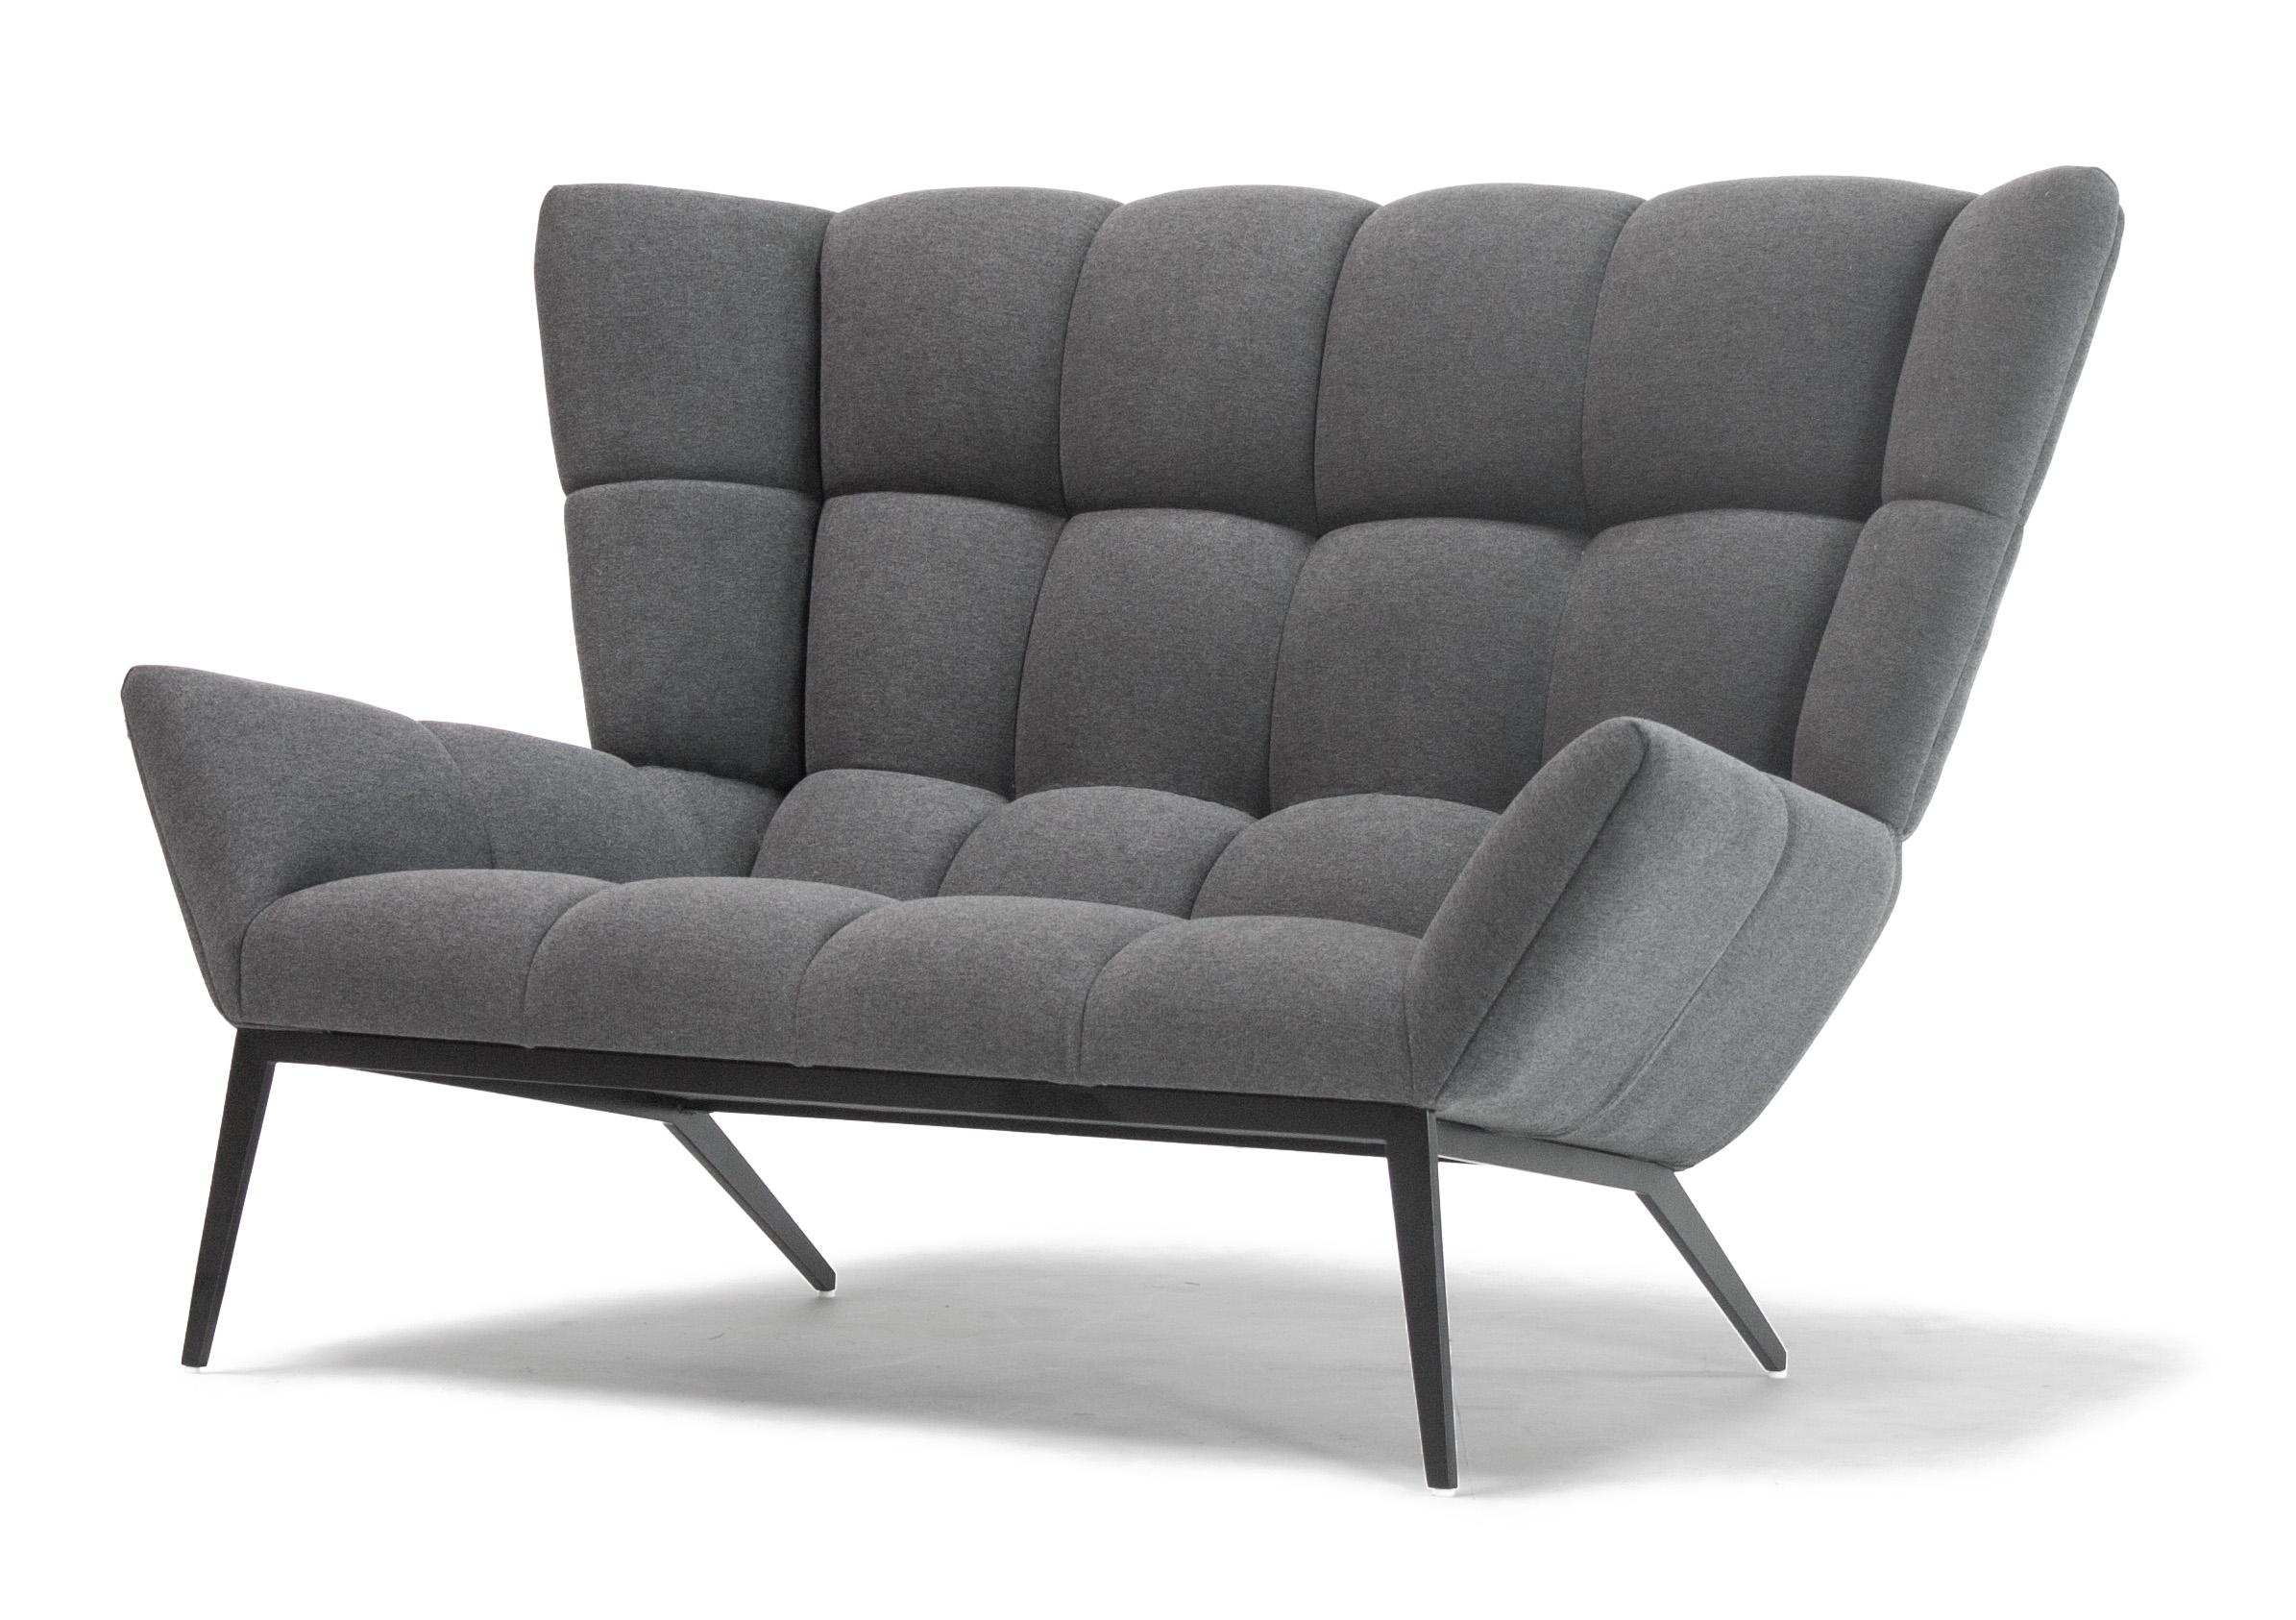 The Tuulla Loveseat, like the Tuulla Chair, takes the idea of tufting to a new level of comfort for two. The loveseat is “made” of tufts over an elegant and sophisticated form. With the lean of the piece and the tufted lumbar support, you’ll love